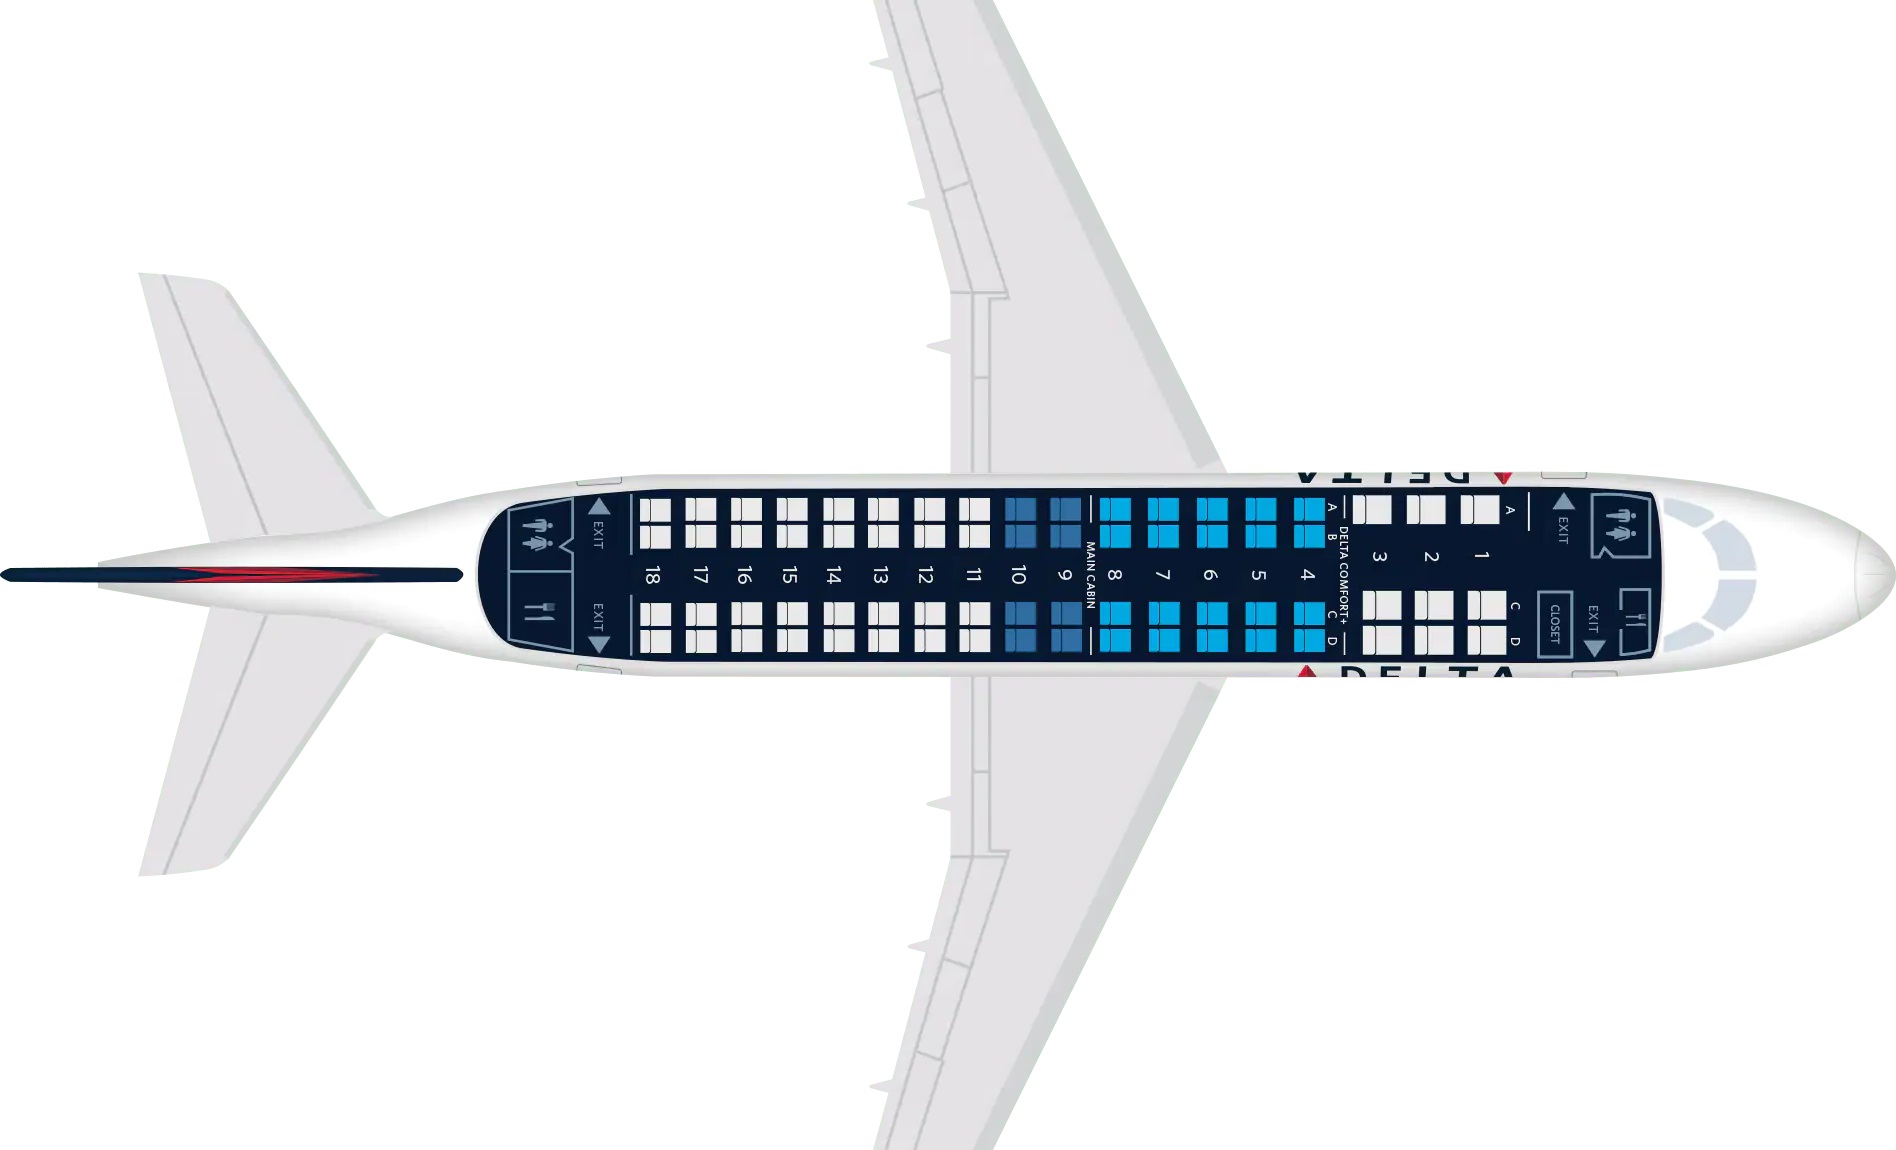 Delta Embraer Emb 175 Jet Seating Chart Two Birds Home